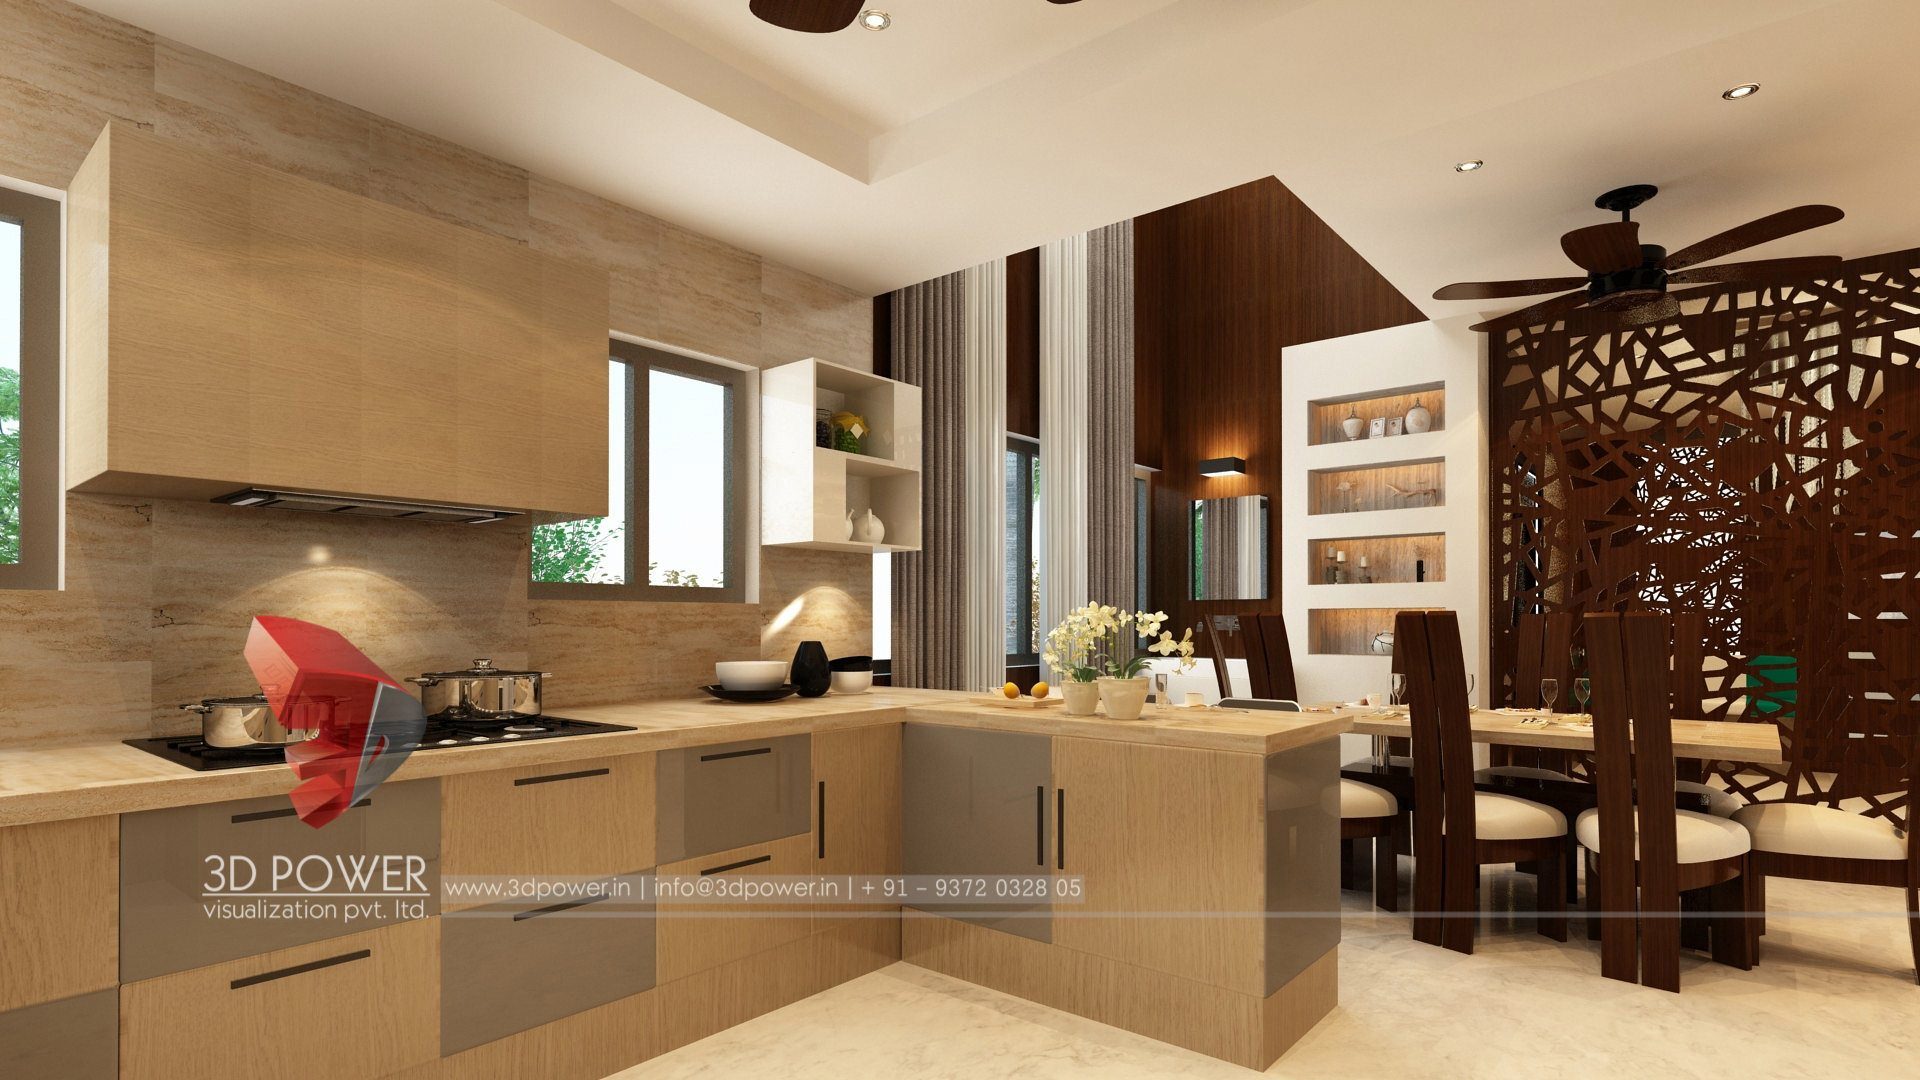 3D rendered Interior Designs for luxurious living | 3D Power